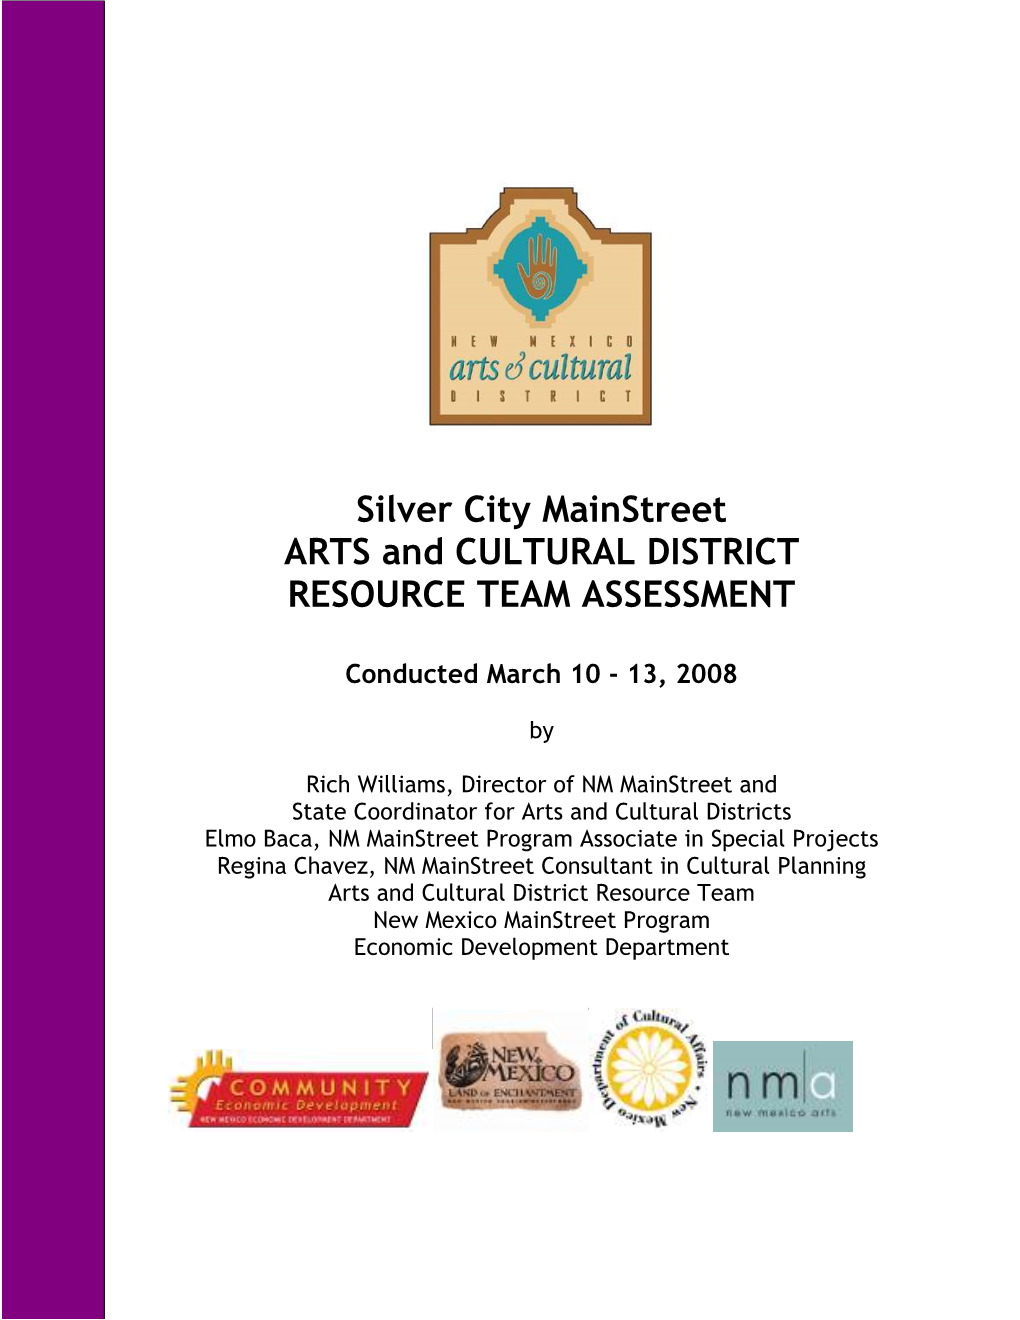 Silver City Mainstreet ARTS and CULTURAL DISTRICT RESOURCE TEAM ASSESSMENT